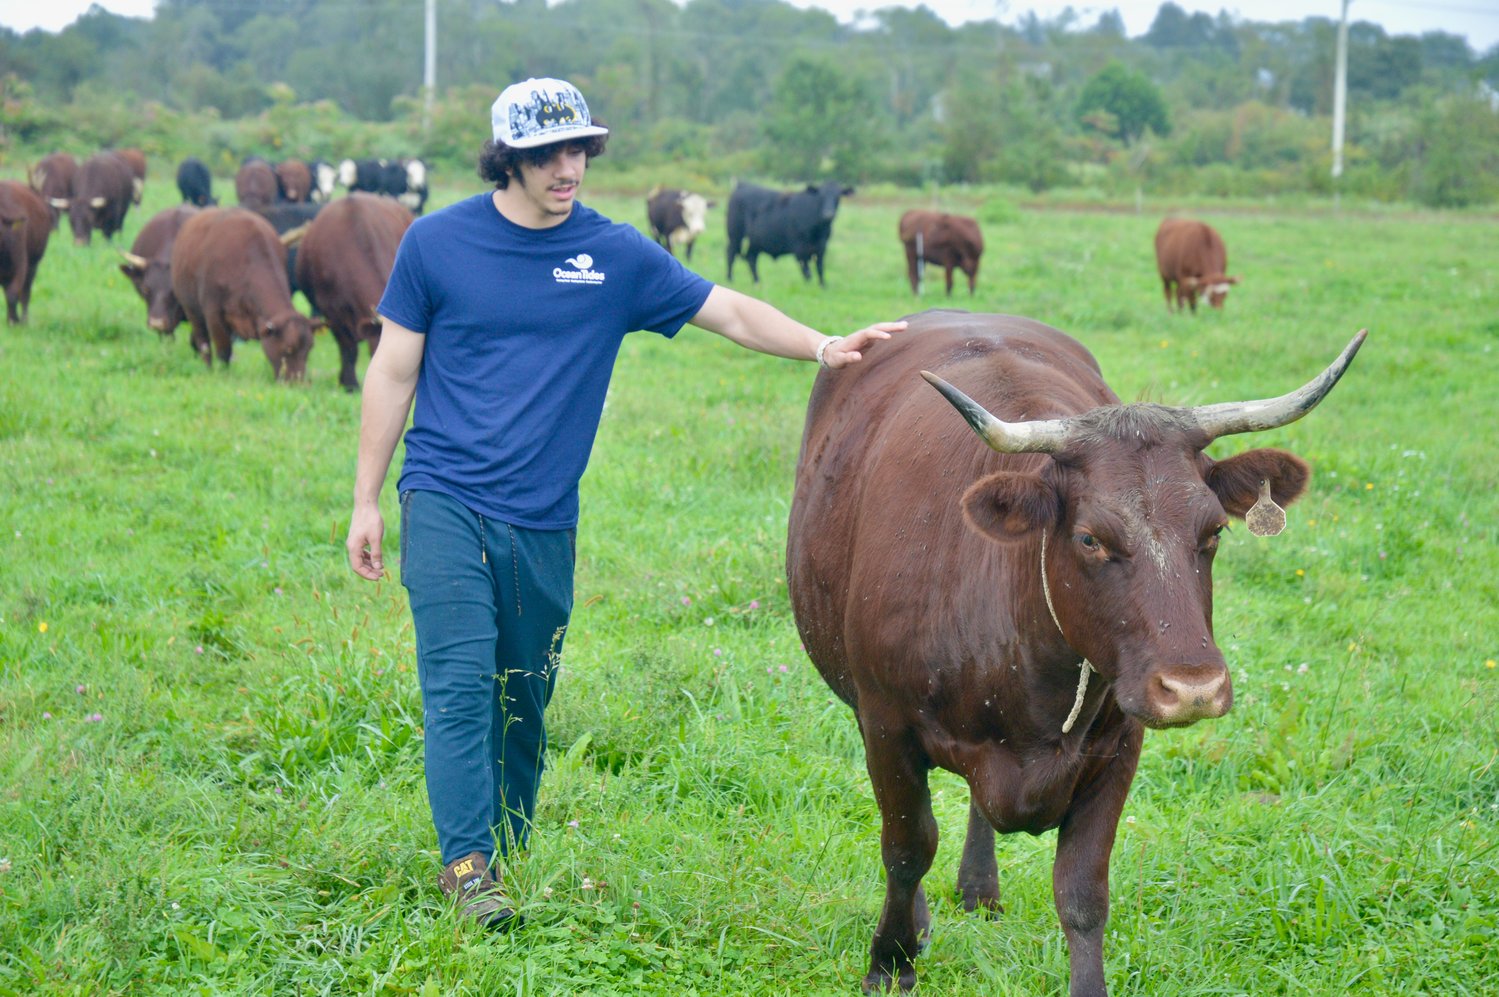 Austin, a student at Ocean Tides School in Narragansett, gains the trust of Fern, the leader of a herd of cattle at Cloverbud Ranch on Jepson Lane. Students visited the farm on seven Wednesday mornings this fall to build communication skills, relationships and trust through bovine therapy.